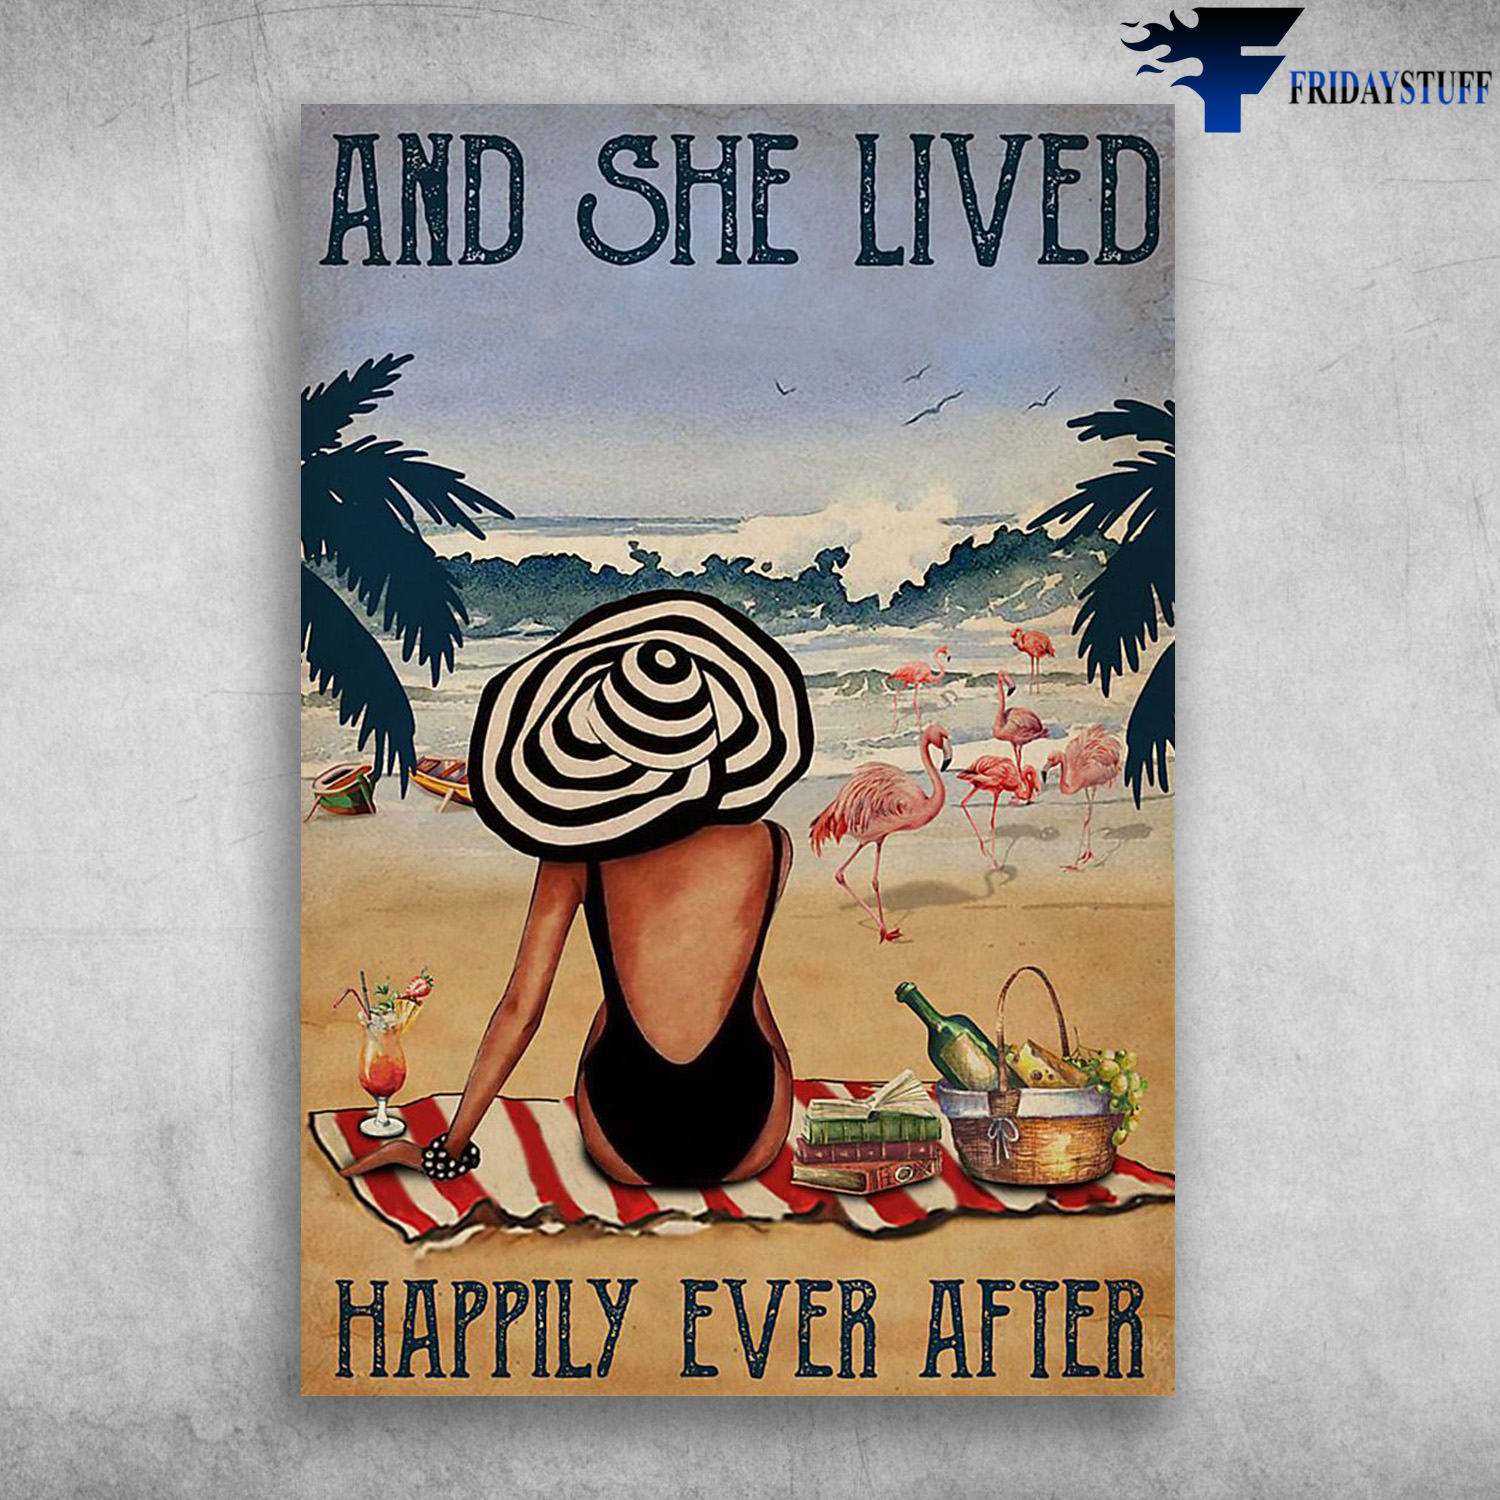 Girl On The Beach - And She Lived, Happily Ever After, Flamingo, Book, Wine,